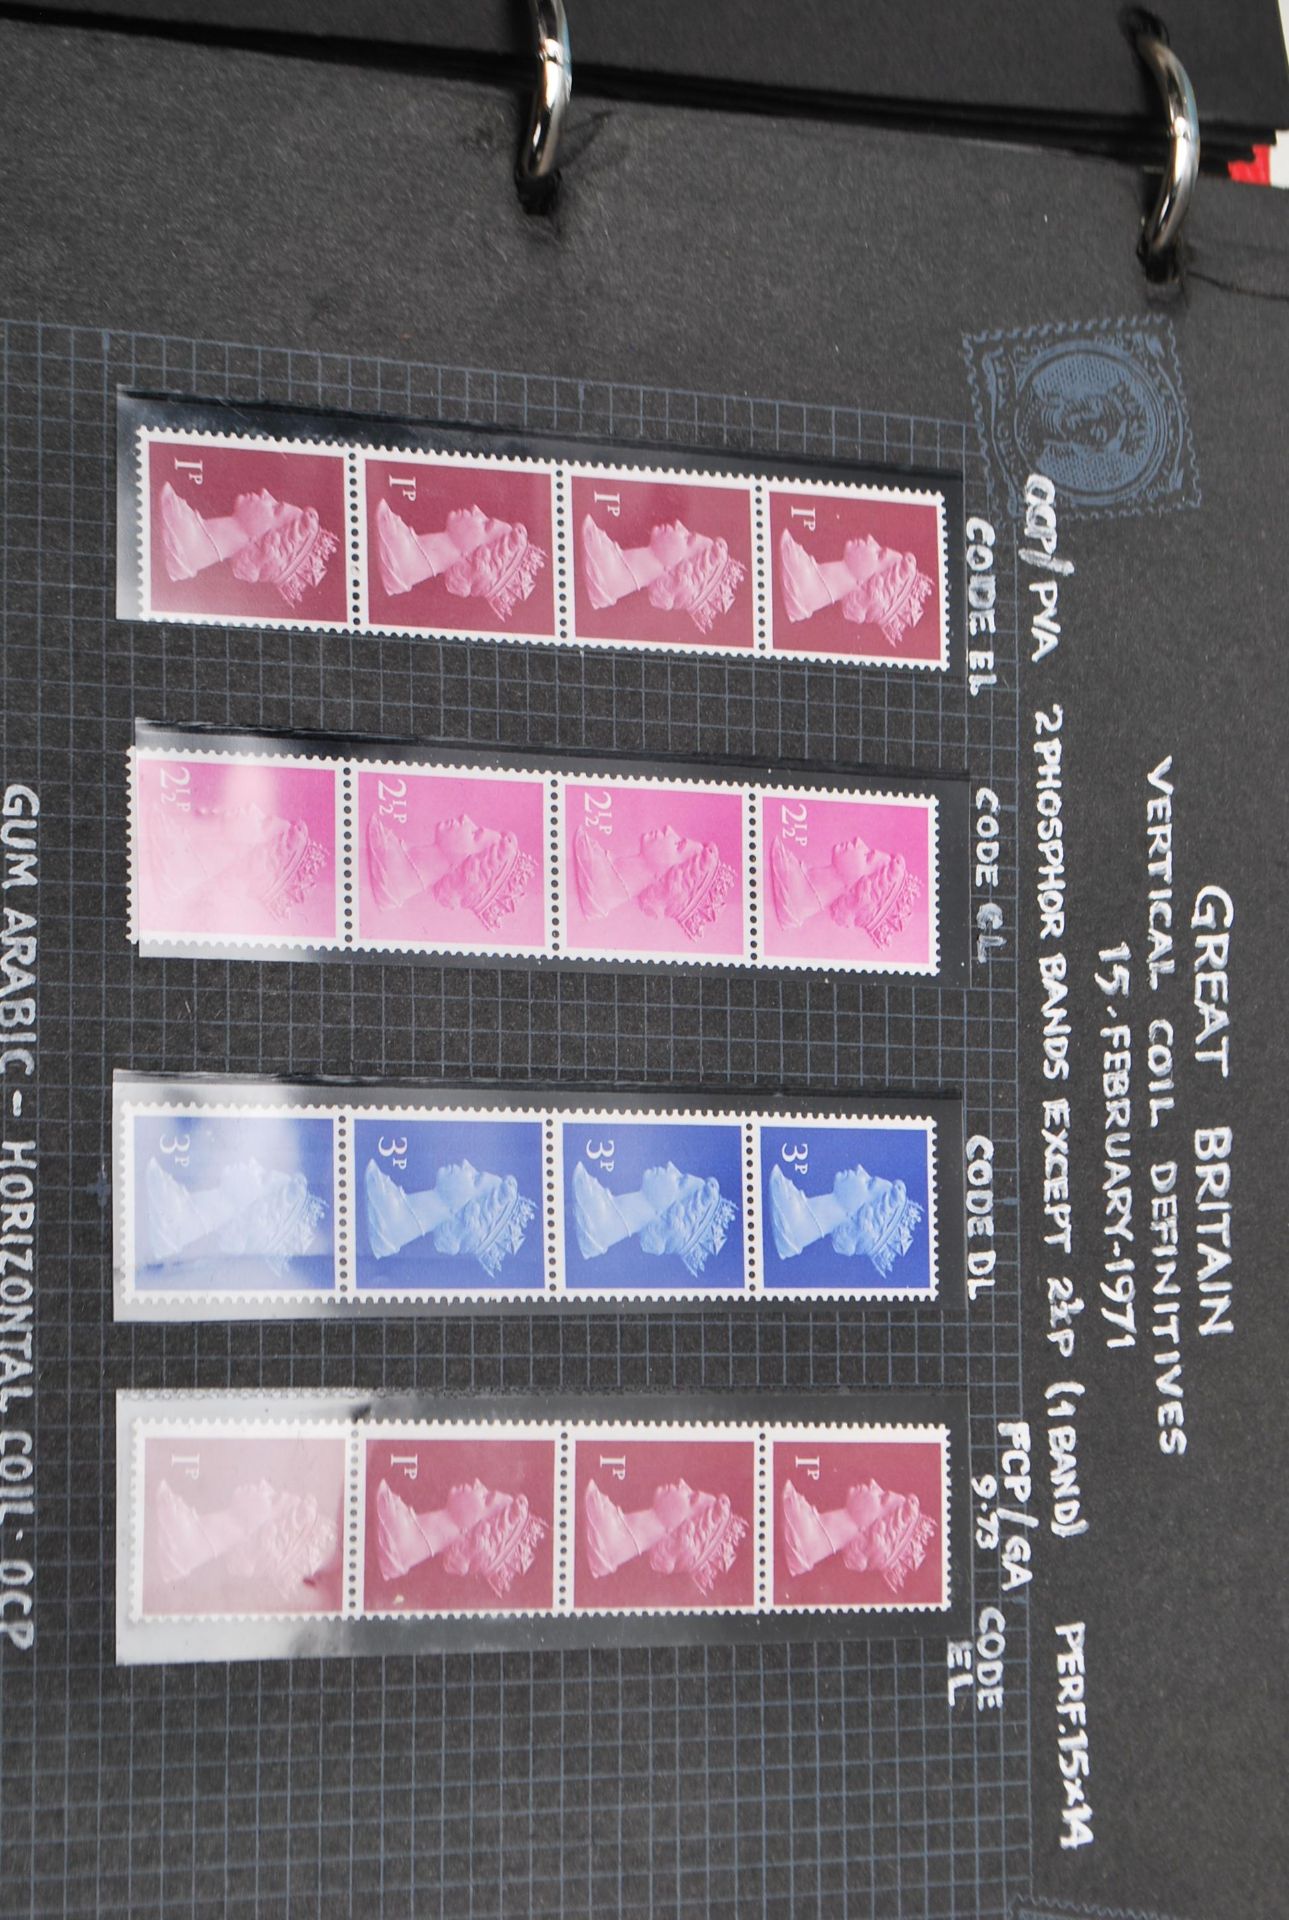 THREE ALBUMS OF MACHIN DEFINITIVE STAMPS + PRESENTATION - Image 14 of 25